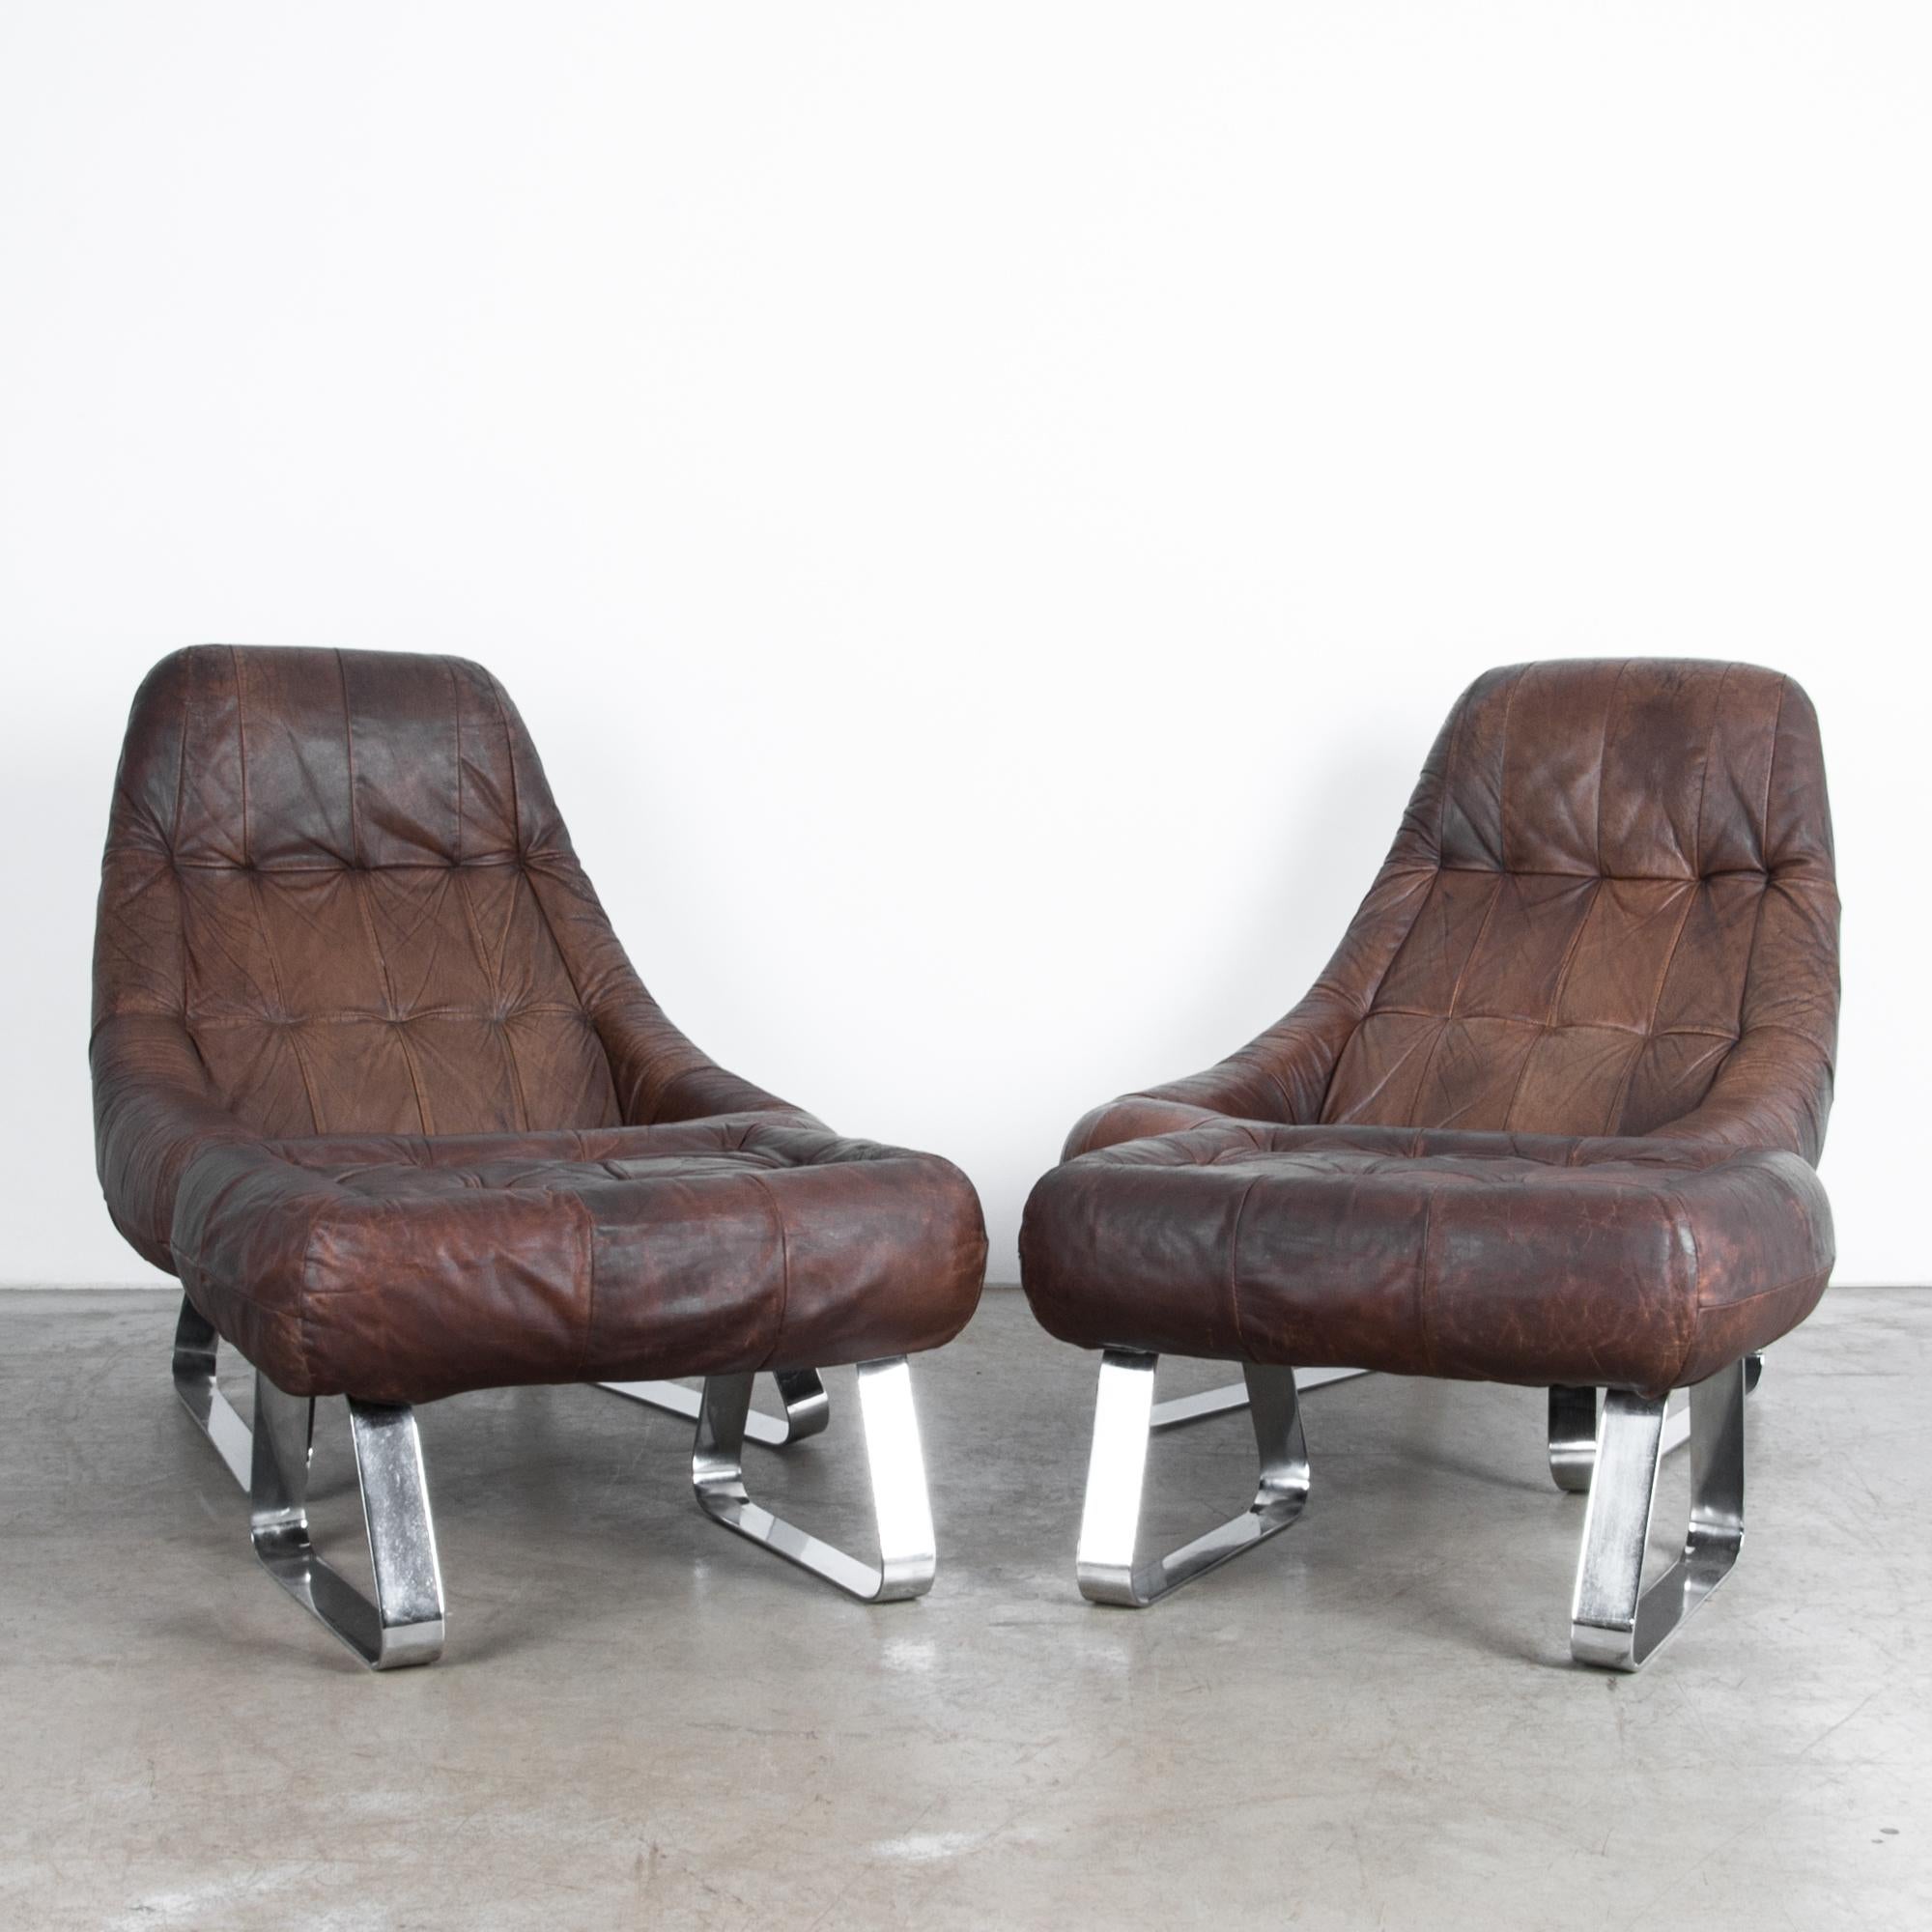 Percival Lafer Dark Brown Chrome Leather Earth Chair with Ottoman, a Pair 1